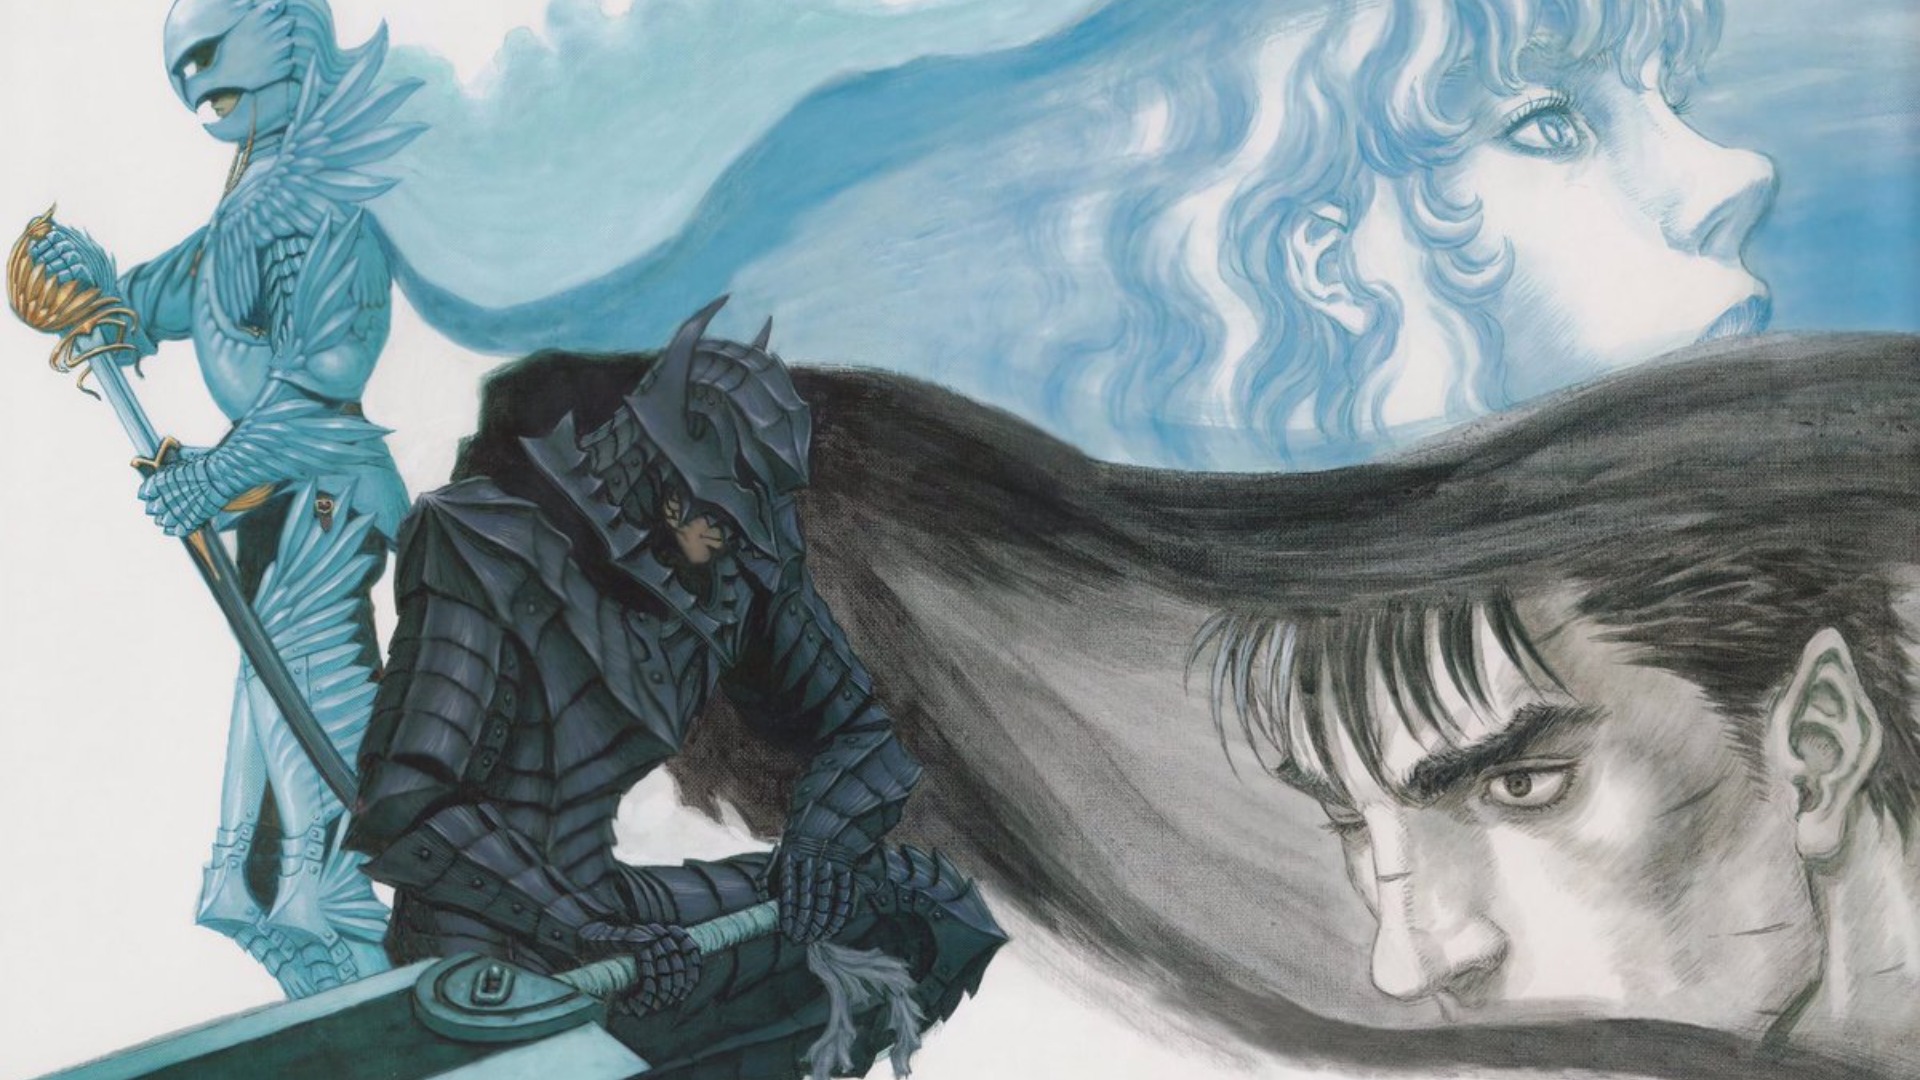 Which Berserk adaptation would you recommend to first time viewers